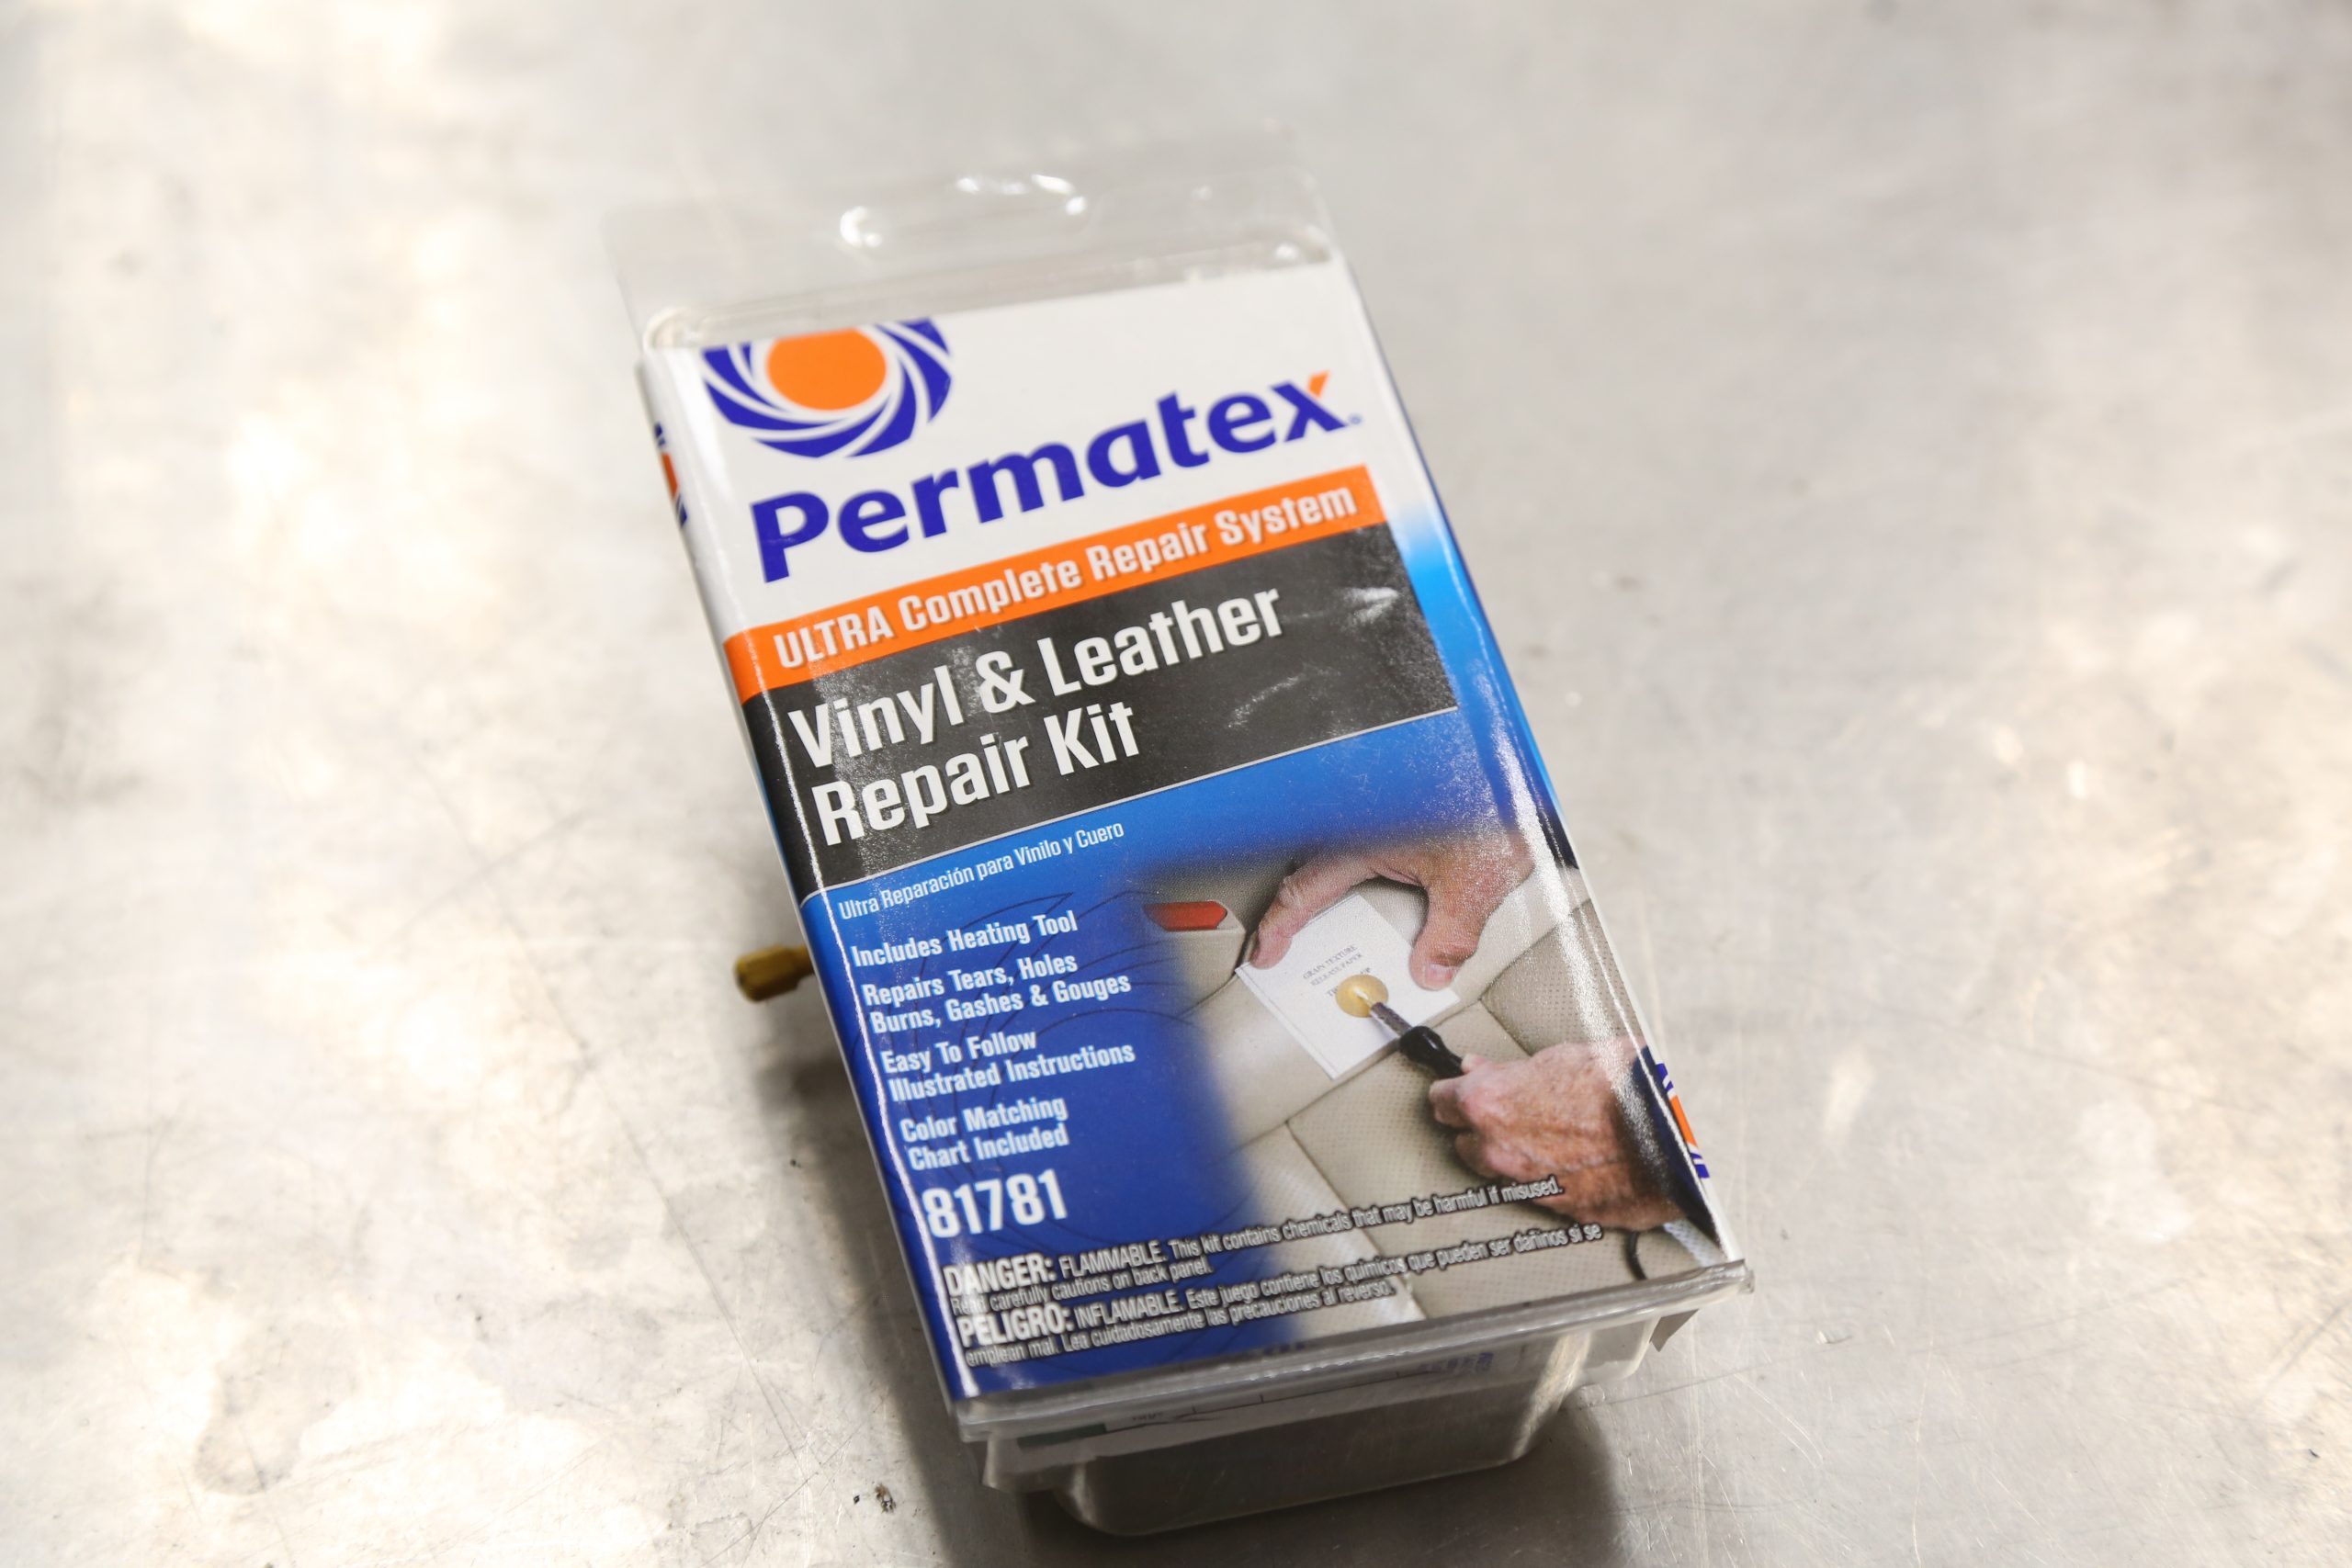 How to Repair/Patch a Leather car seat or furniture. Permatex Kit 